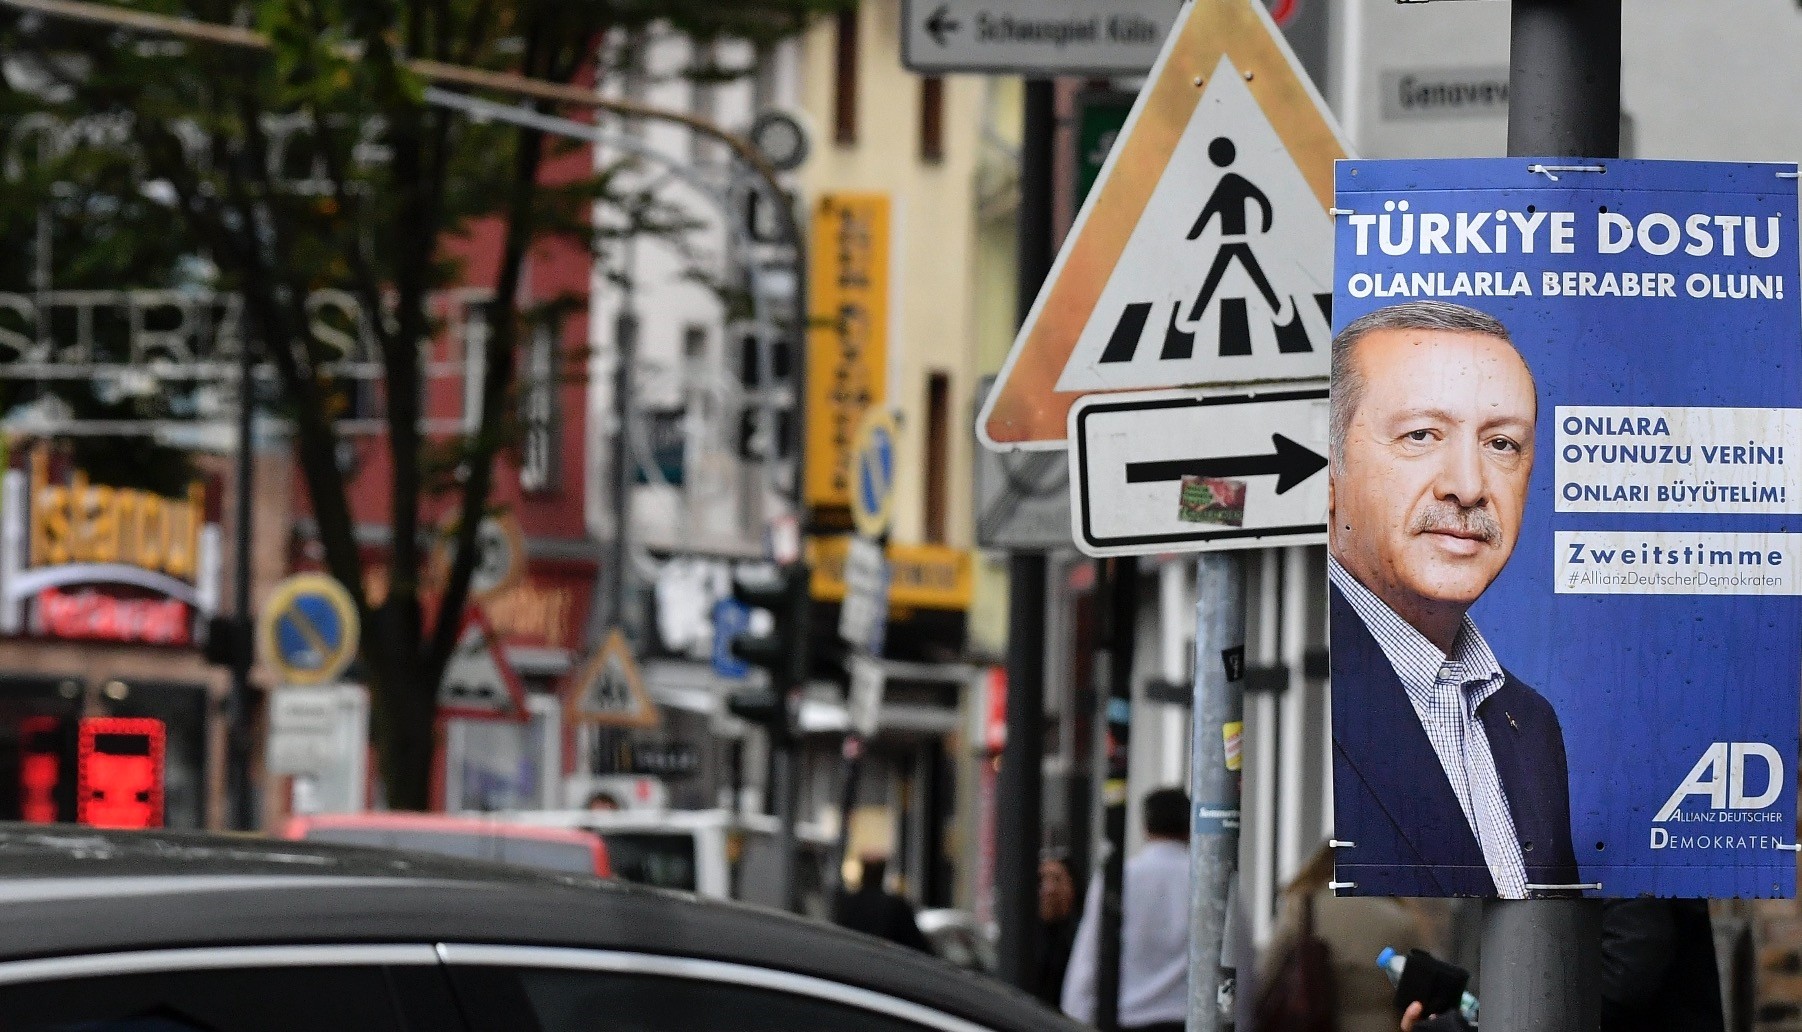 A campaign poster of the Alliance of German Democrats (ADD) party for the German election 2017 shows portrait of President Recep Tayyip Erdou011fan and a slogan that reads u201cStand together with Turkeyu2019s friends. Give them your votes! Help them grow!u201d